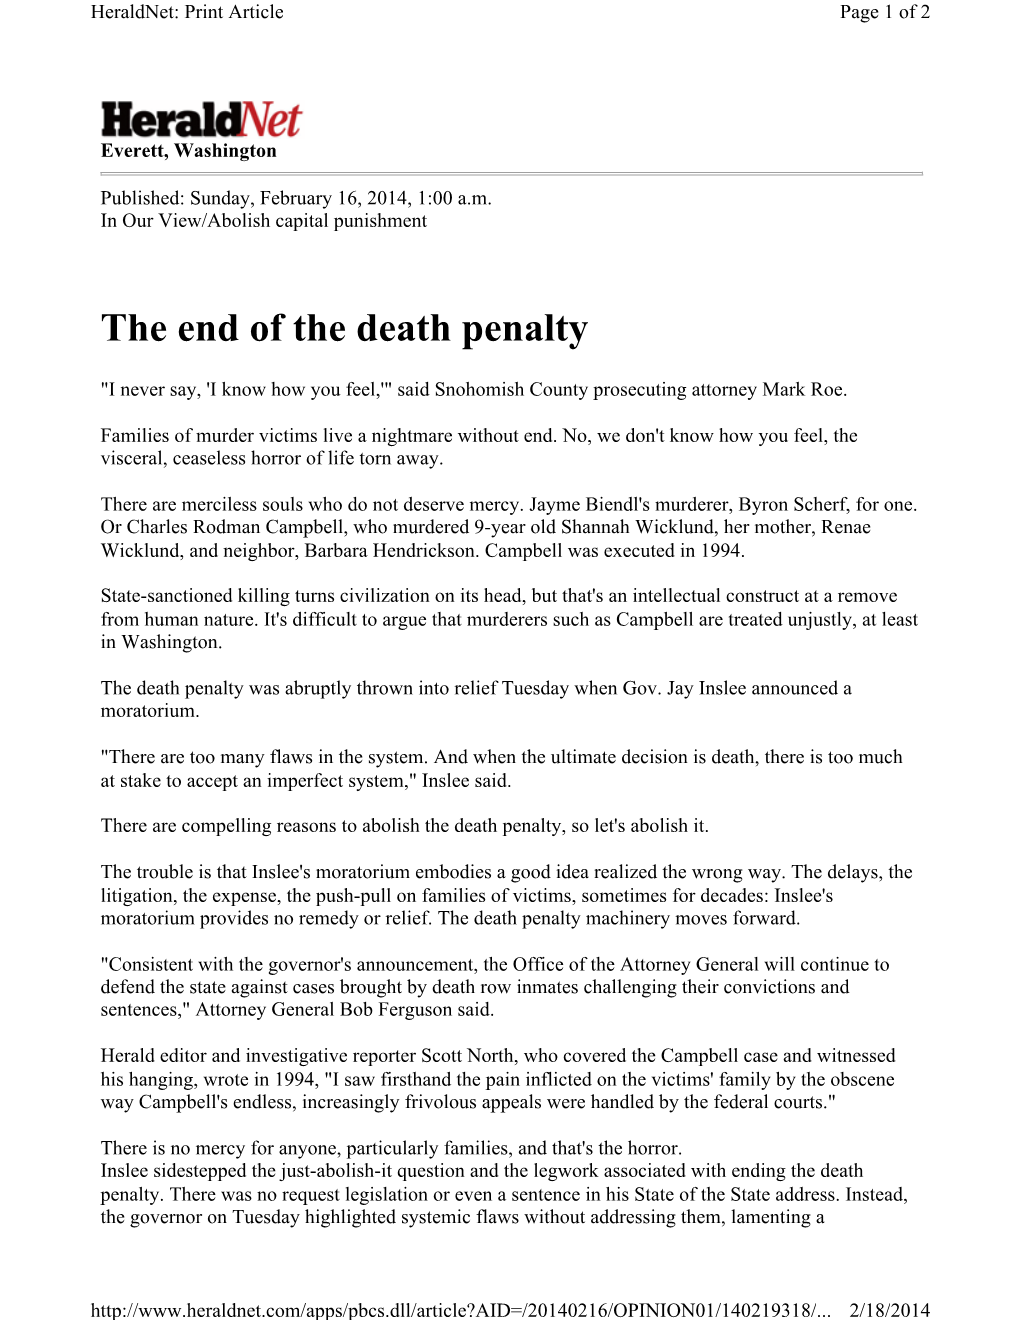 The End of the Death Penalty